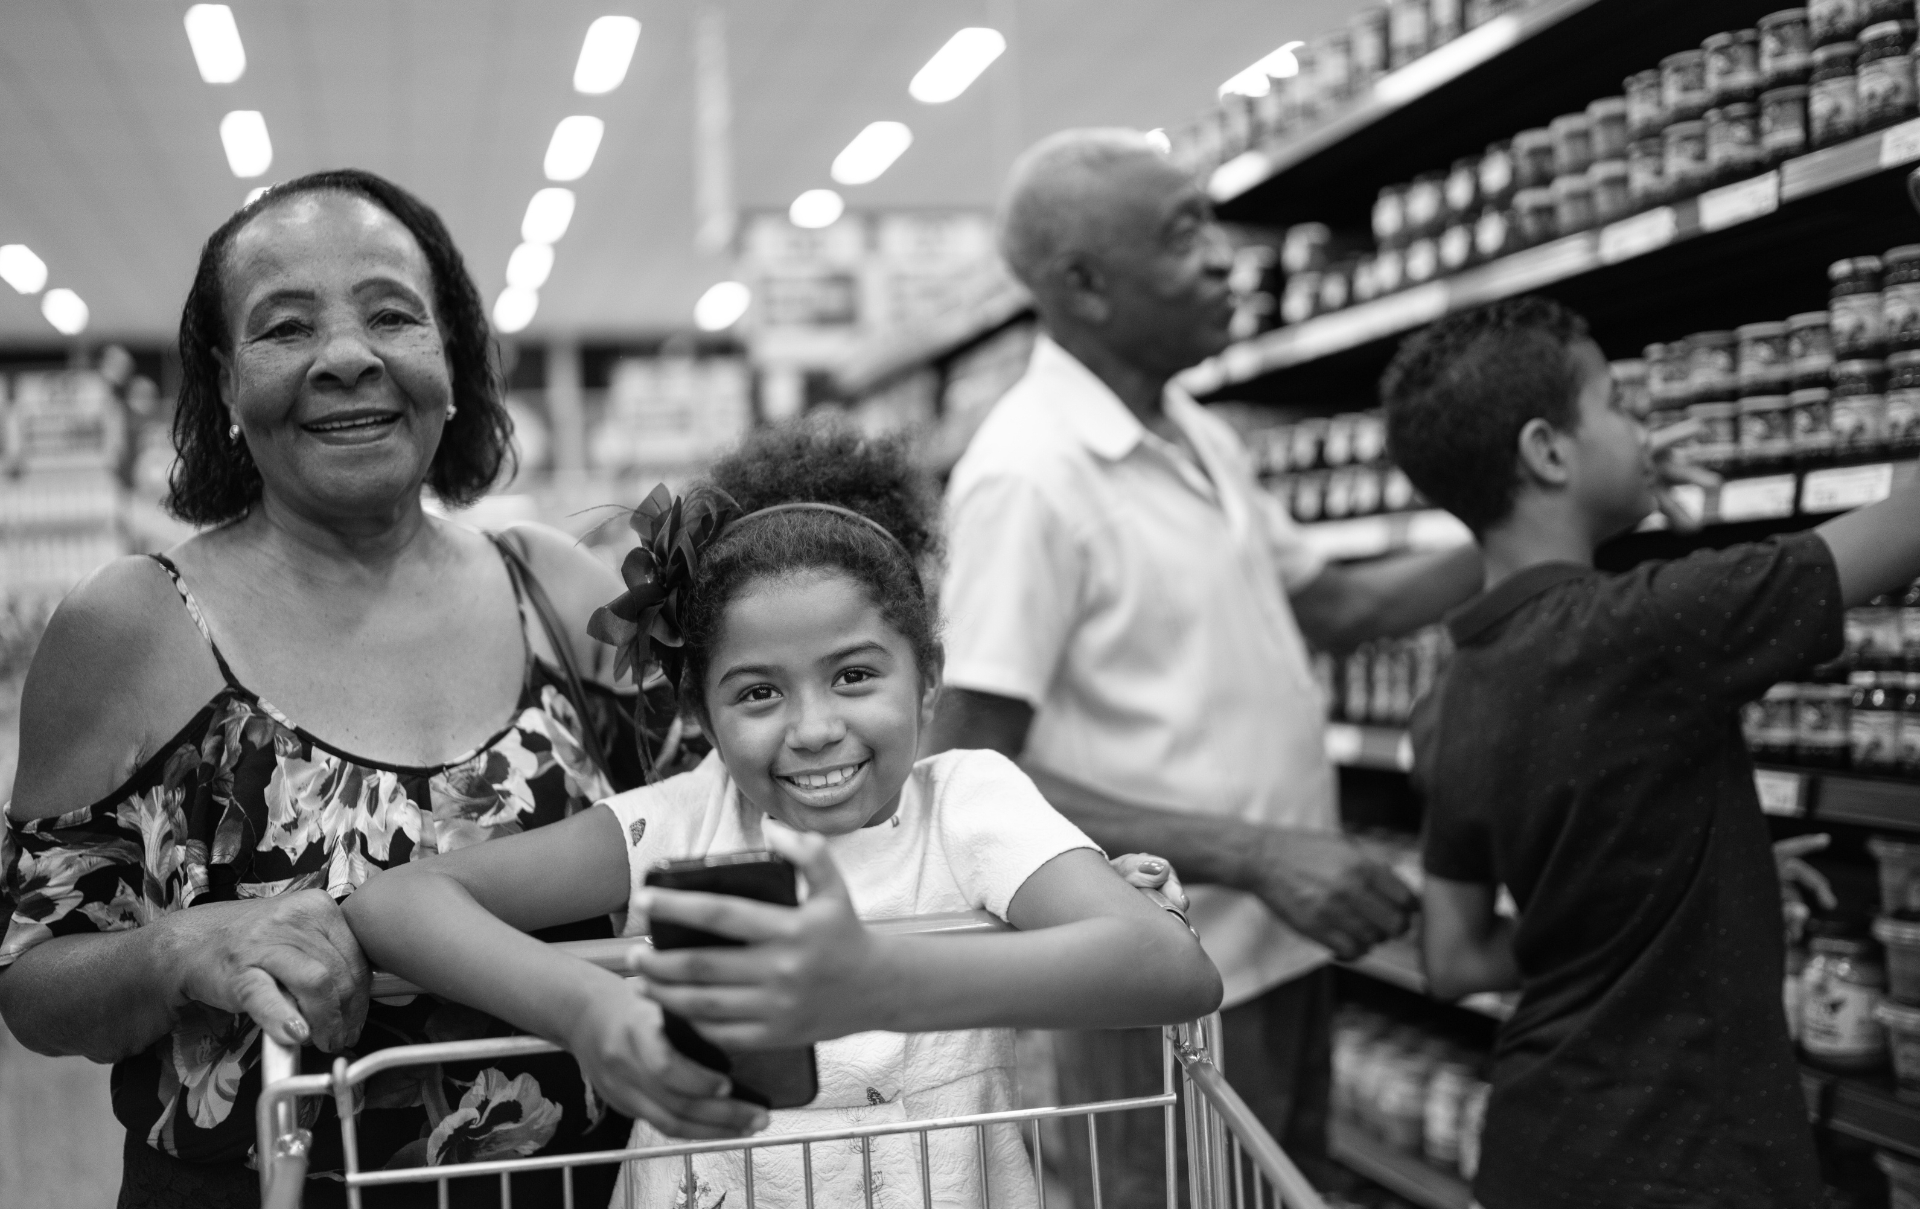 an older women stands behind a little girl who is pushing a grocery cart through the store